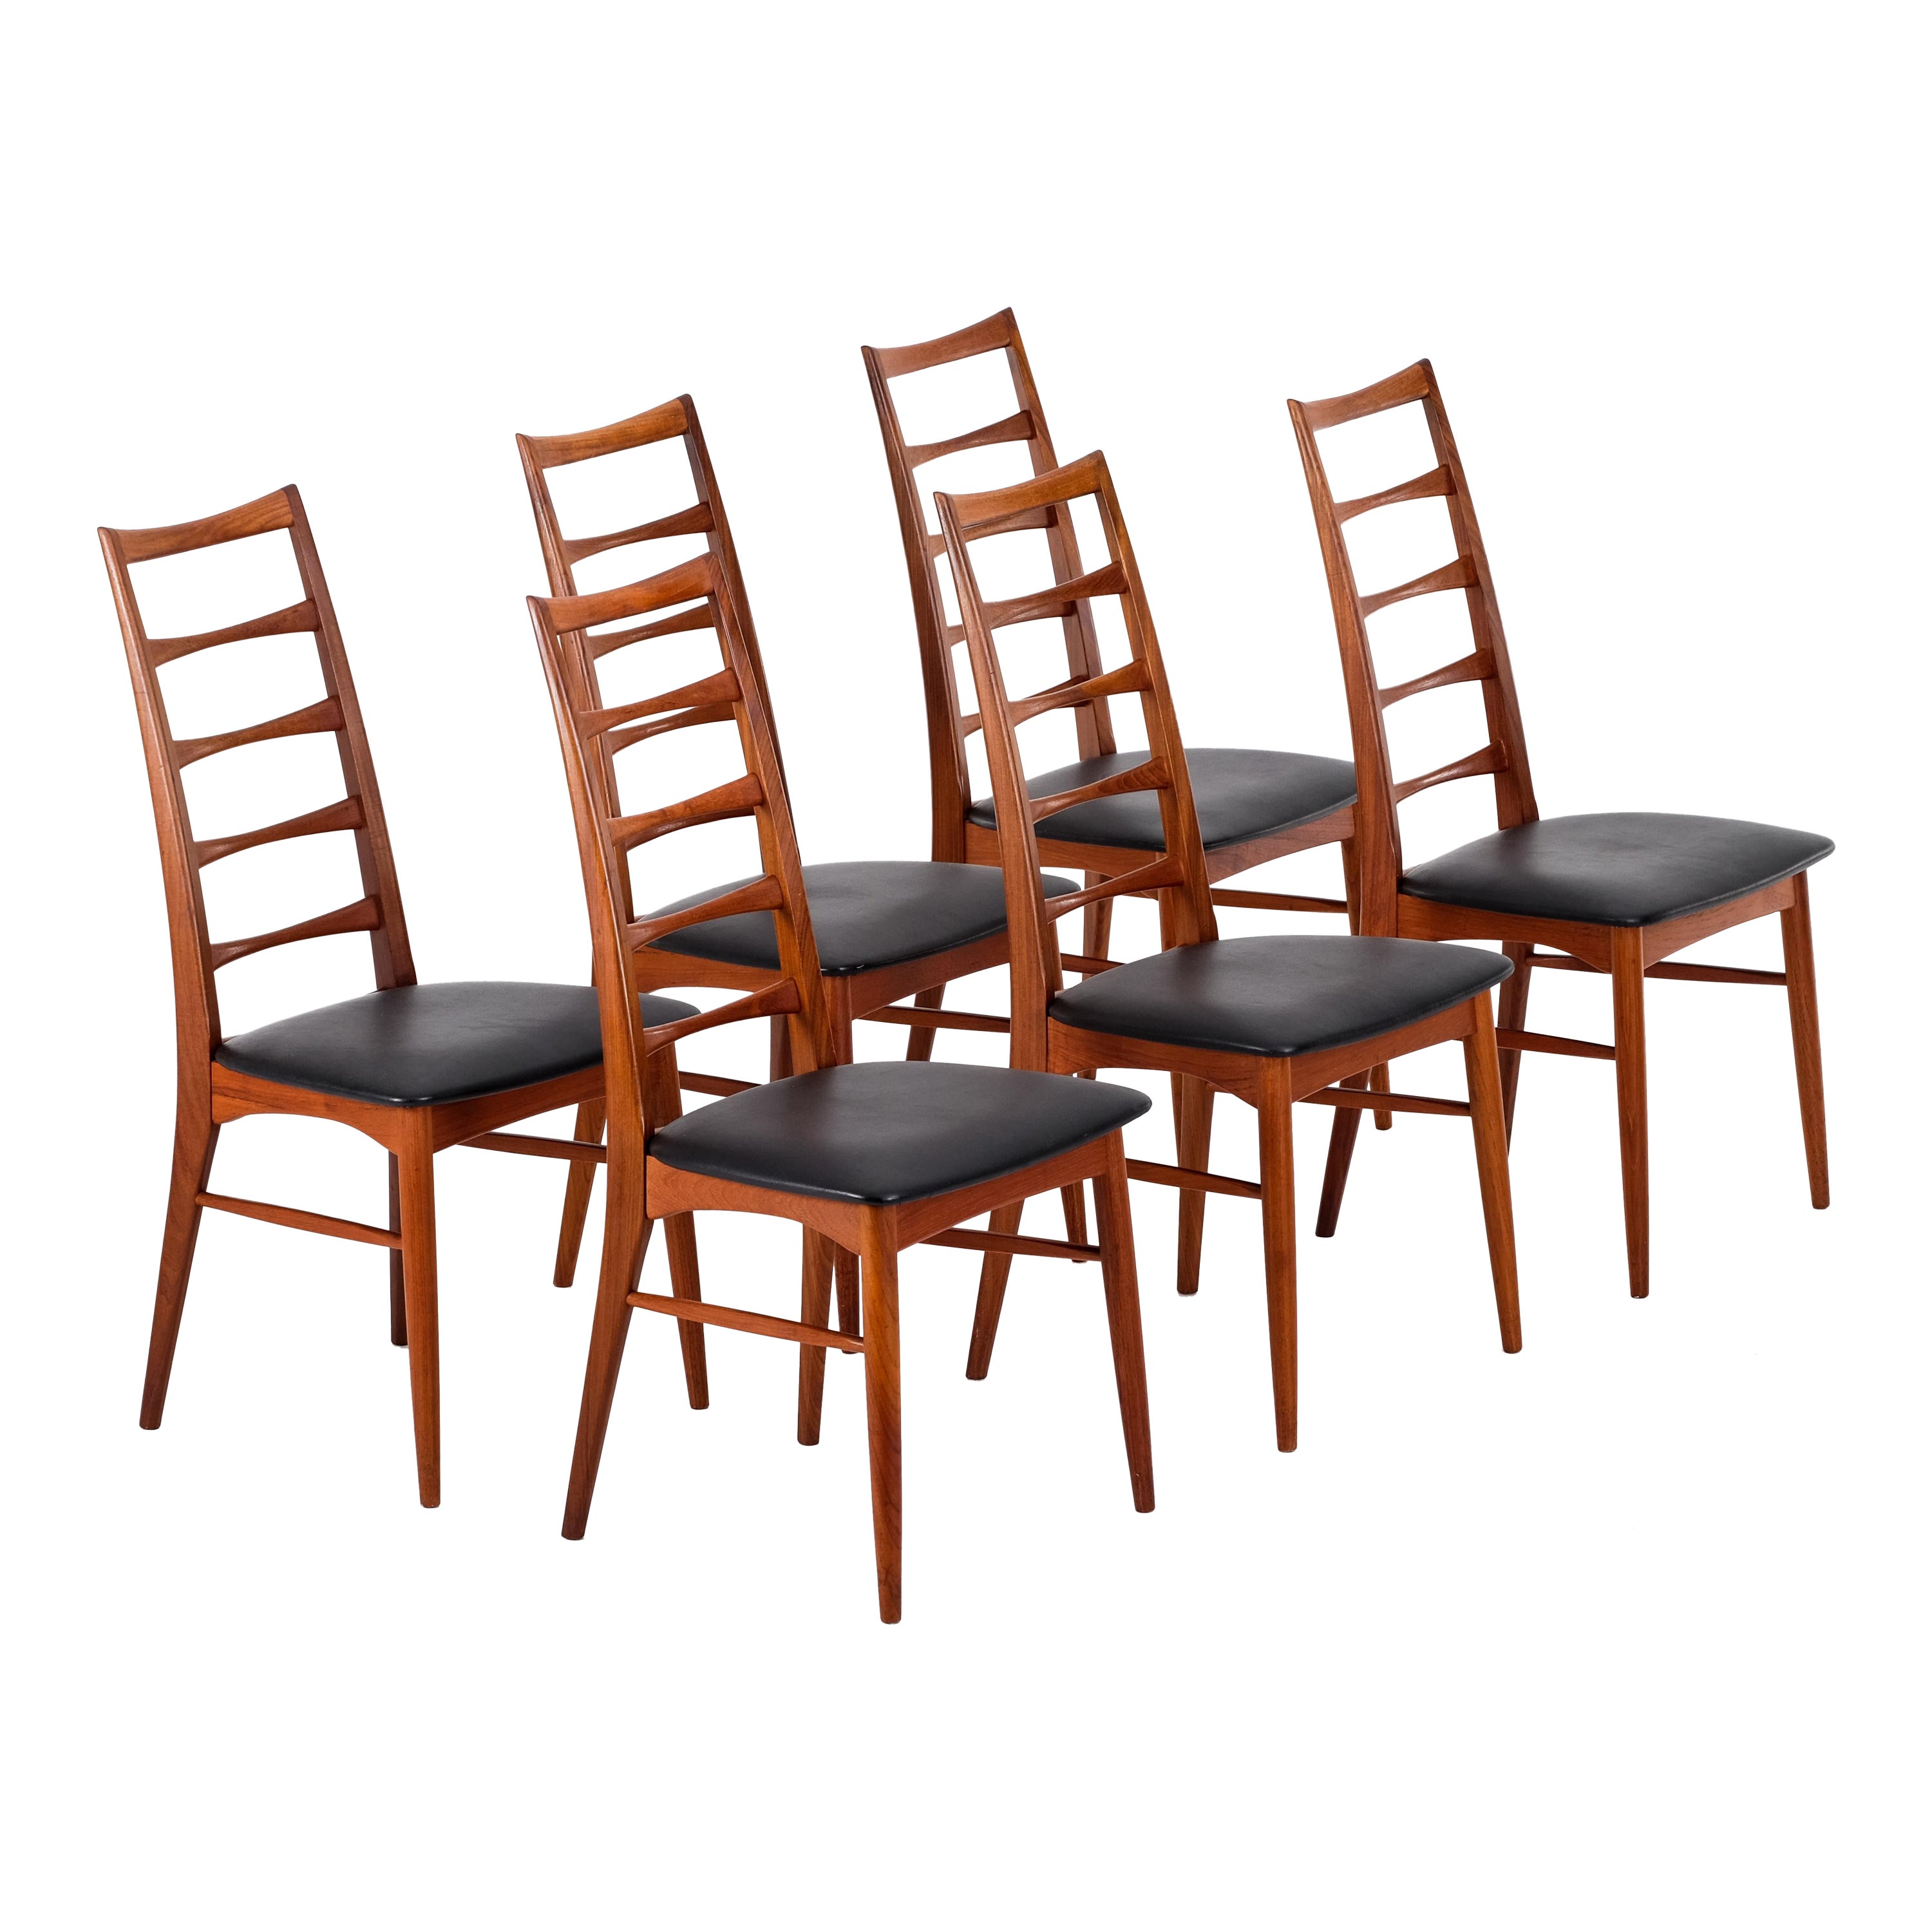 Set of 6 'Lis' chairs by Niels Koefoed, Denmark, 1960s For Sale